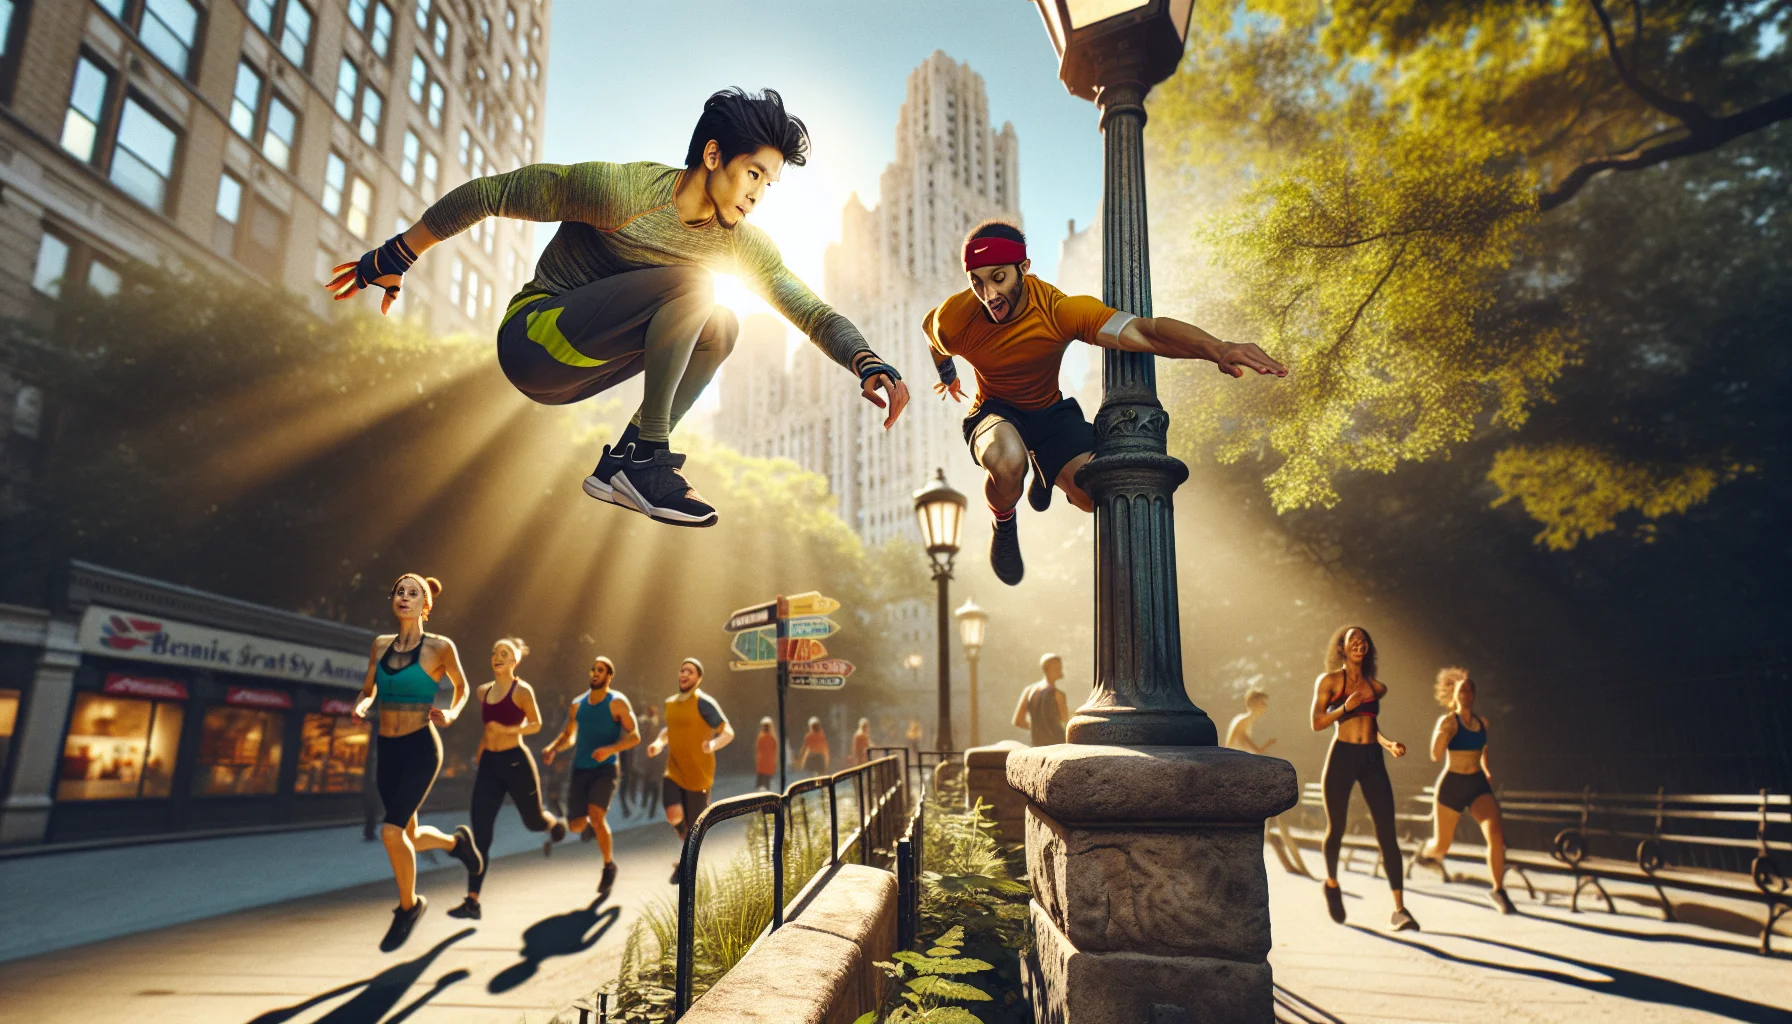 Imagine a bustling city park, bathed in warm sunlight. At the heart of the scene, monitor two athletes engrossed in performing parkour. One South Asian male, in mid-jump, traverses from an old stone wall to a rusted lamppost. His face is painted with sheer determination. Nearby, a Black female athlete is climbing a tree with agility and prowess, her laughter contagiously inspiring passersby. Their athletic gear is bright and colorful, adding a dash of cheer to the whole scenario. The scene inspires fun, laughter and underlines the joy of exercise. Spare no details in capturing the energy and essence of outdoor fitness.